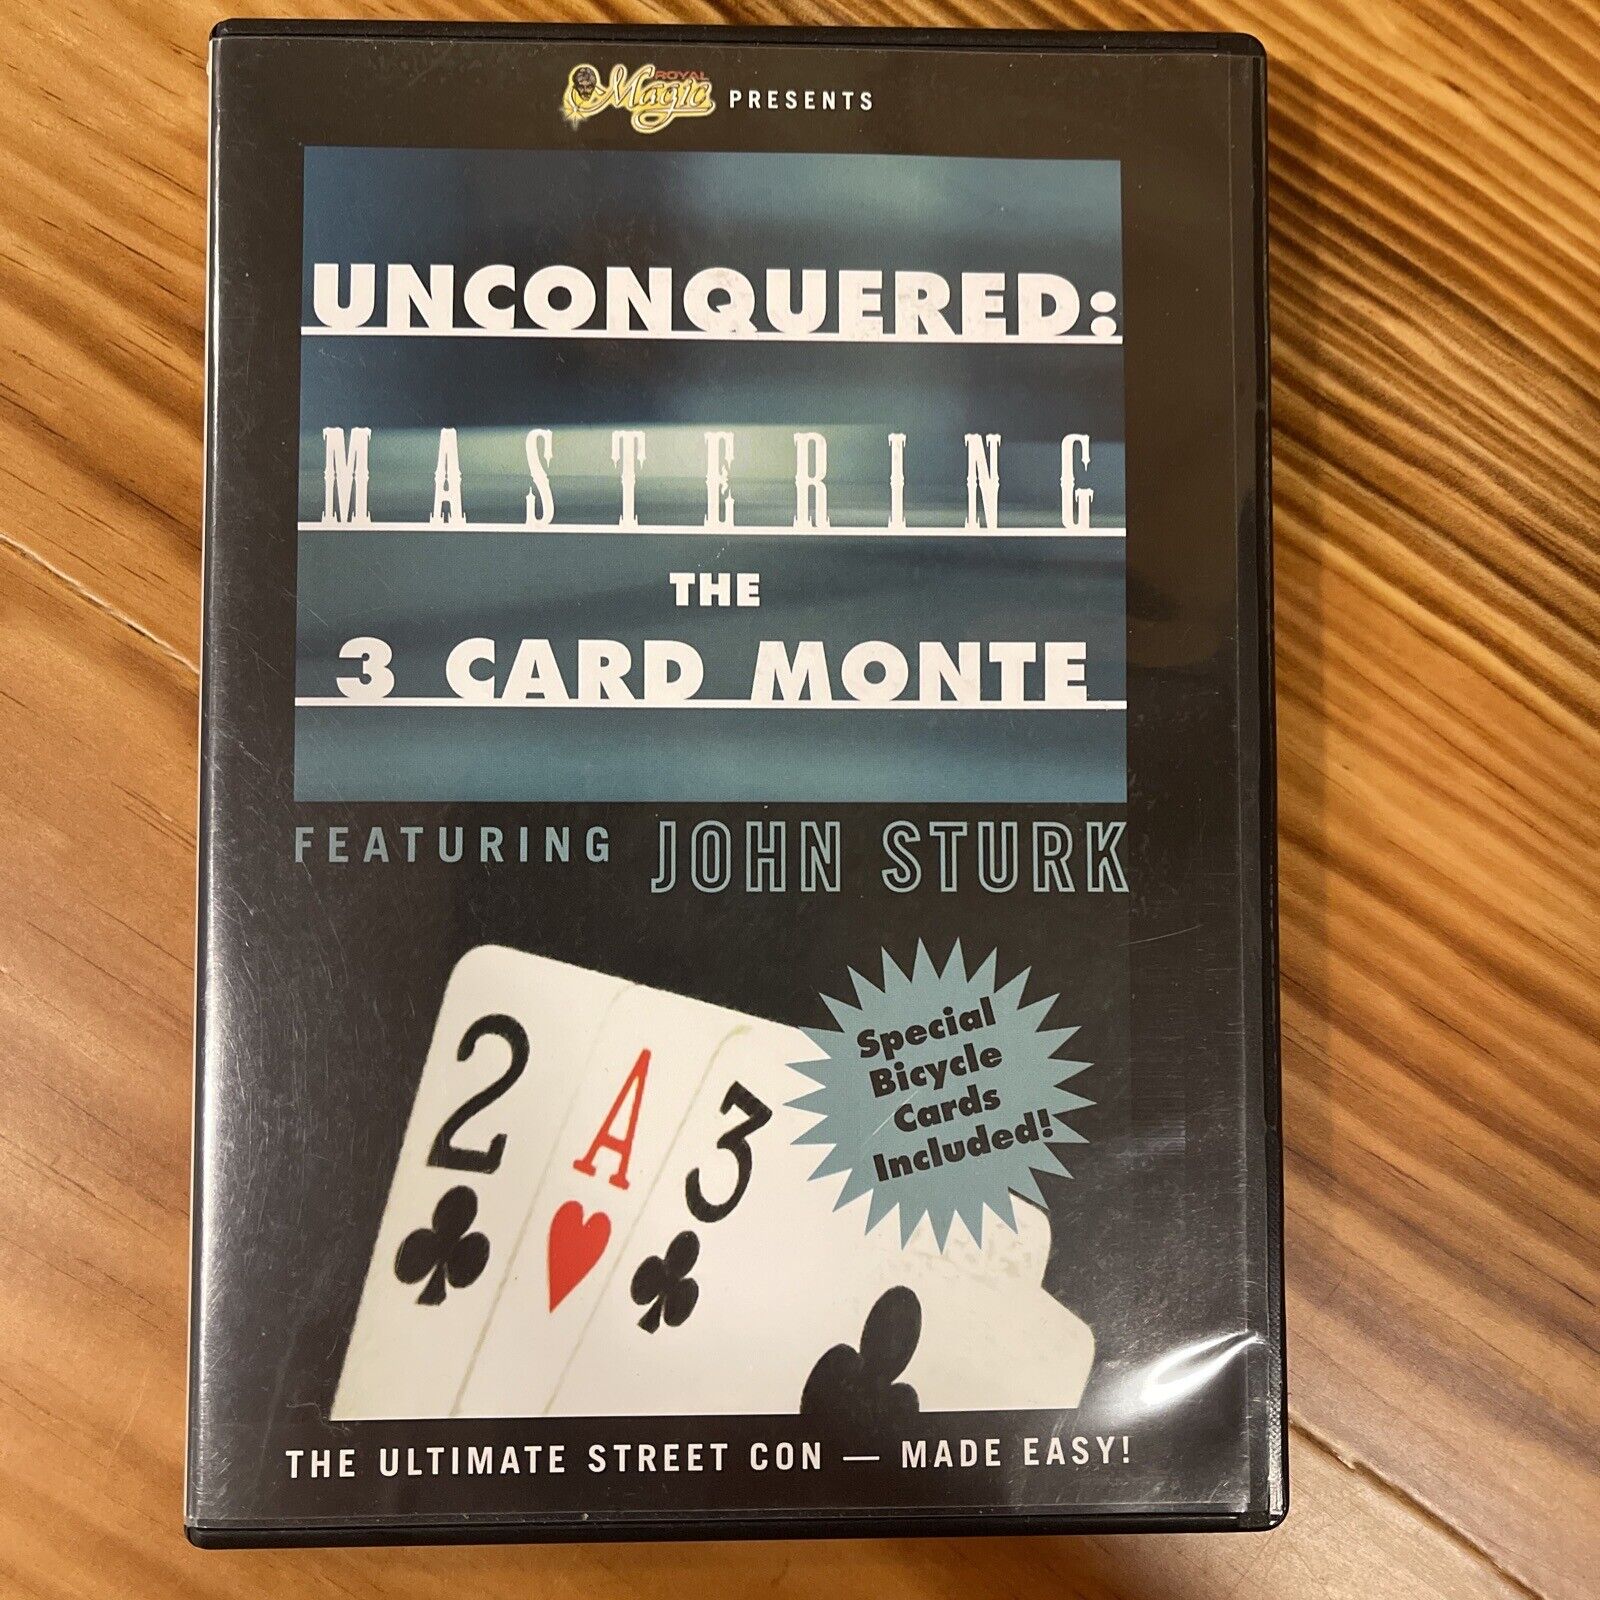 UNCONQUERED: MASTERING THE 3 CARD MONTE by John Sturk Magic DVD & GIMMICK - New*